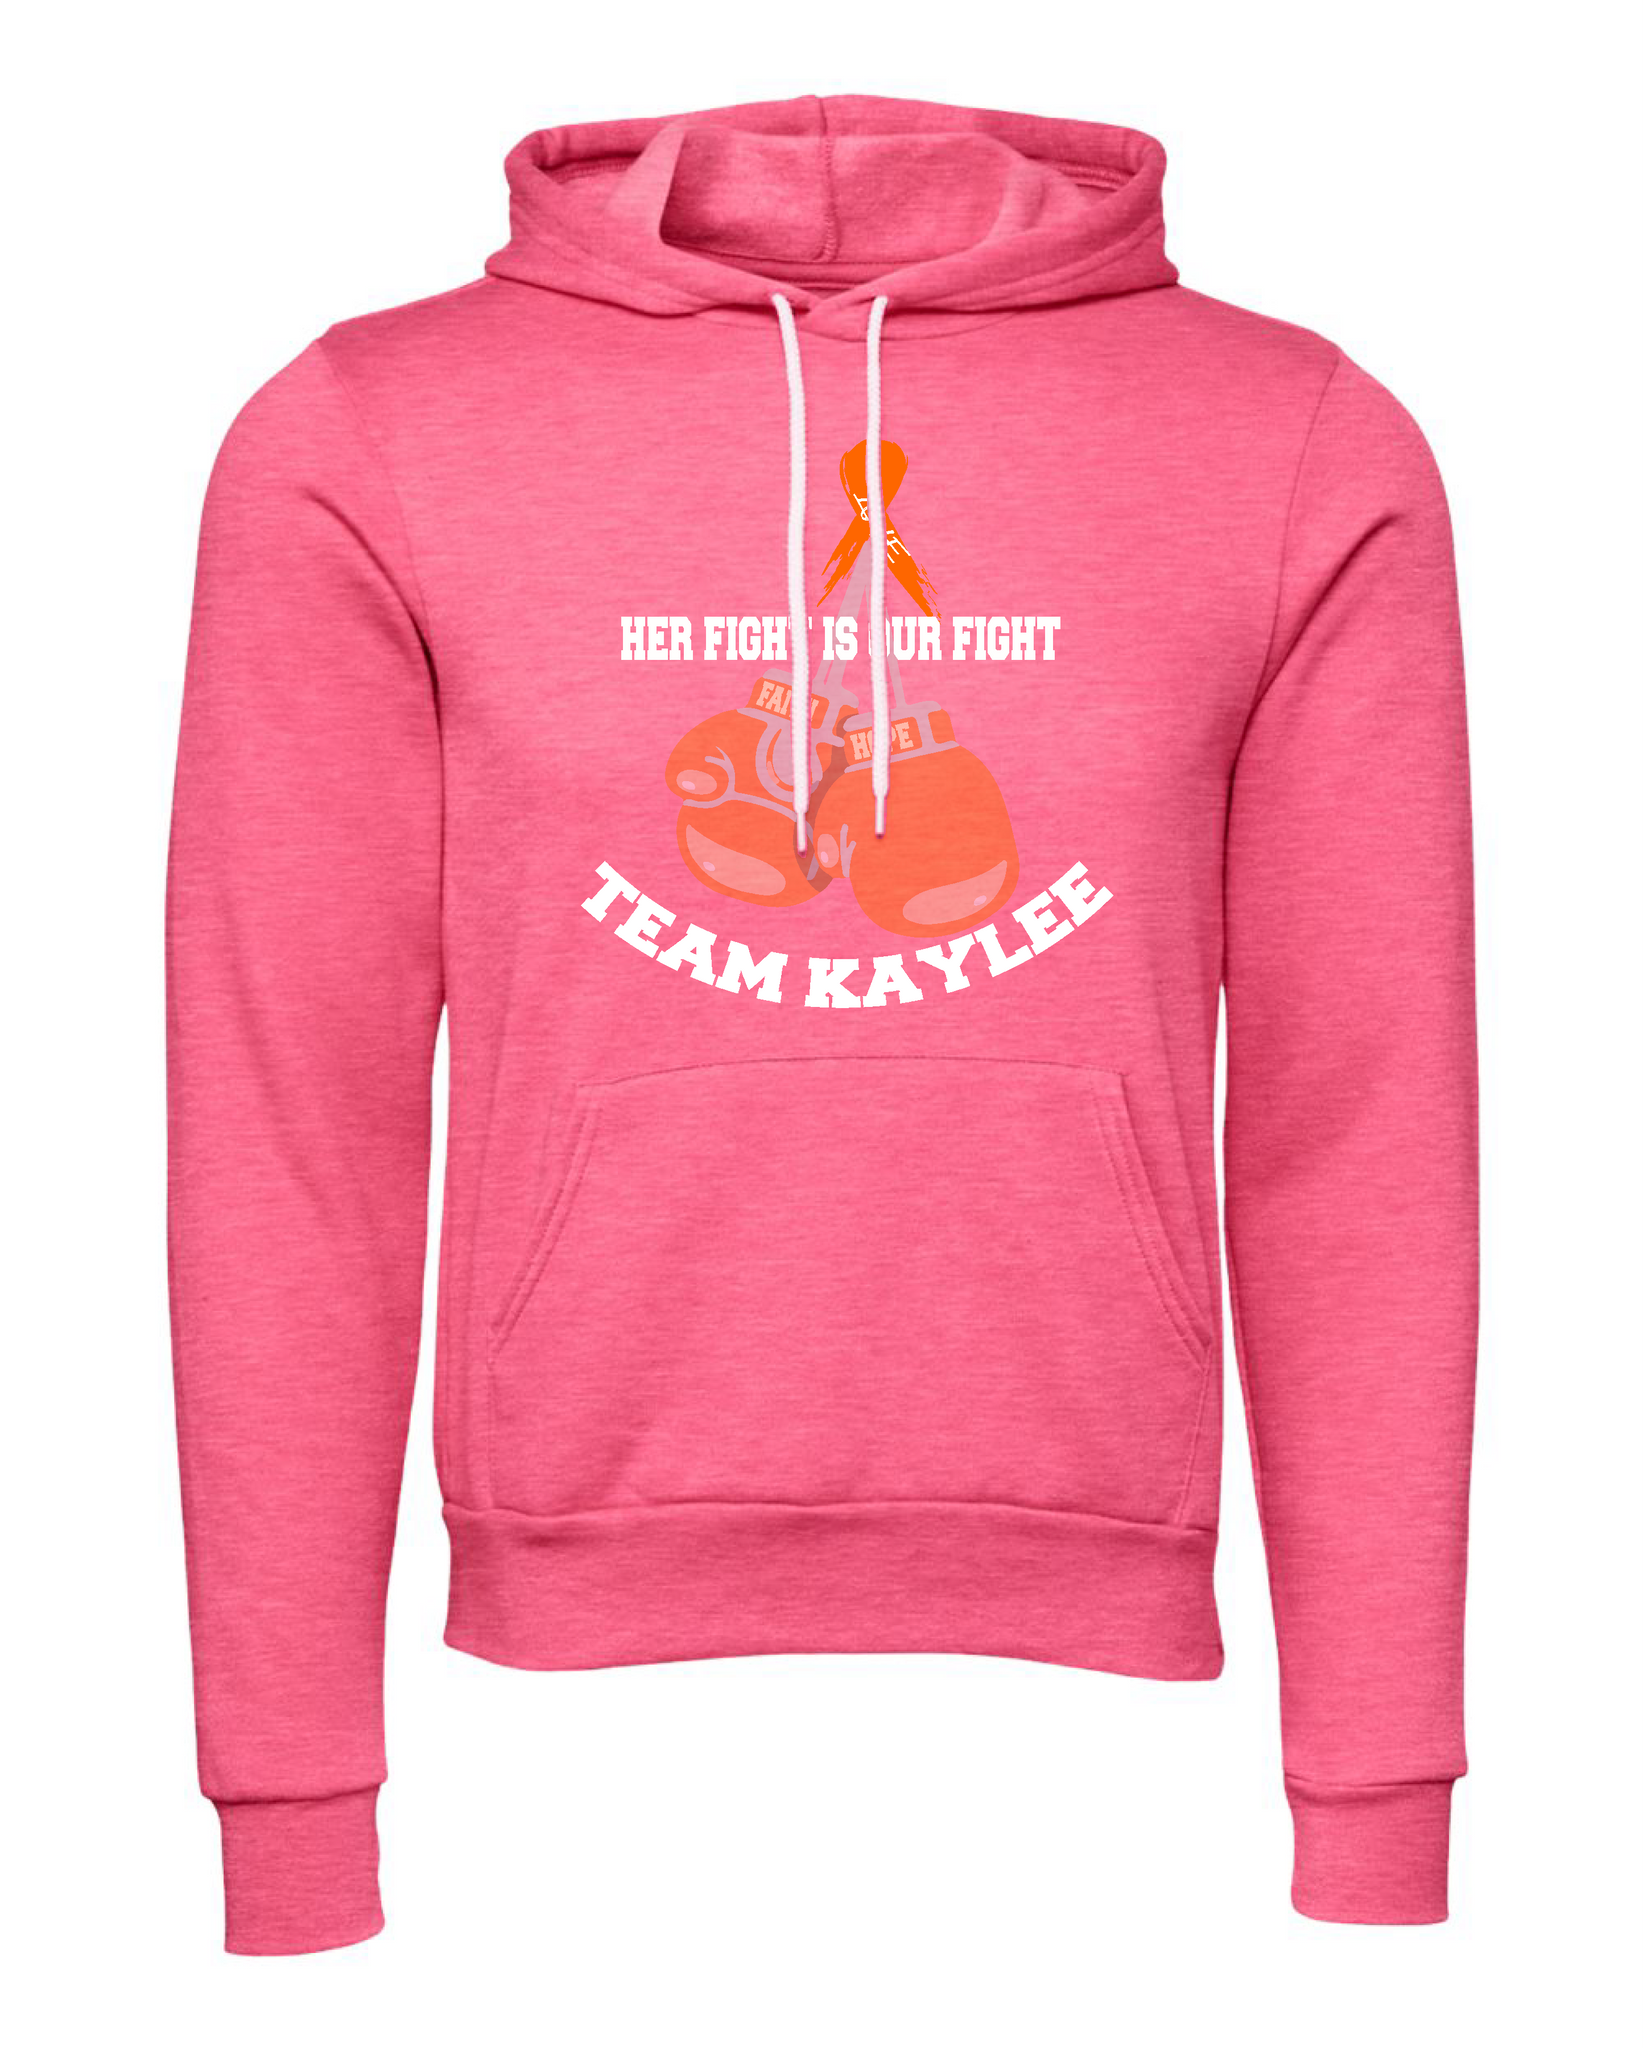 Kaylee's Fight (HOODIES - additional colors)